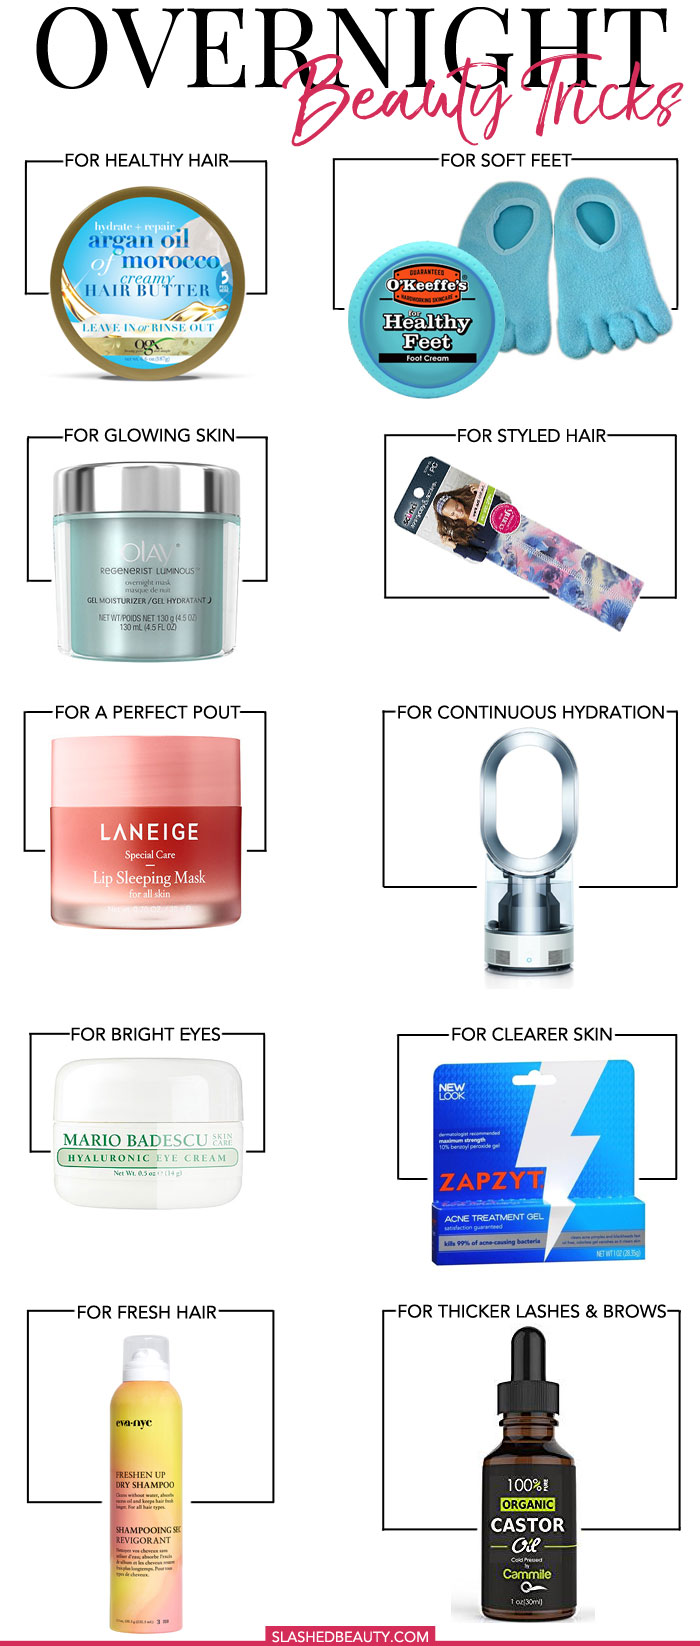 10 Overnight Beauty Tricks to Save Time & Treat Yourself